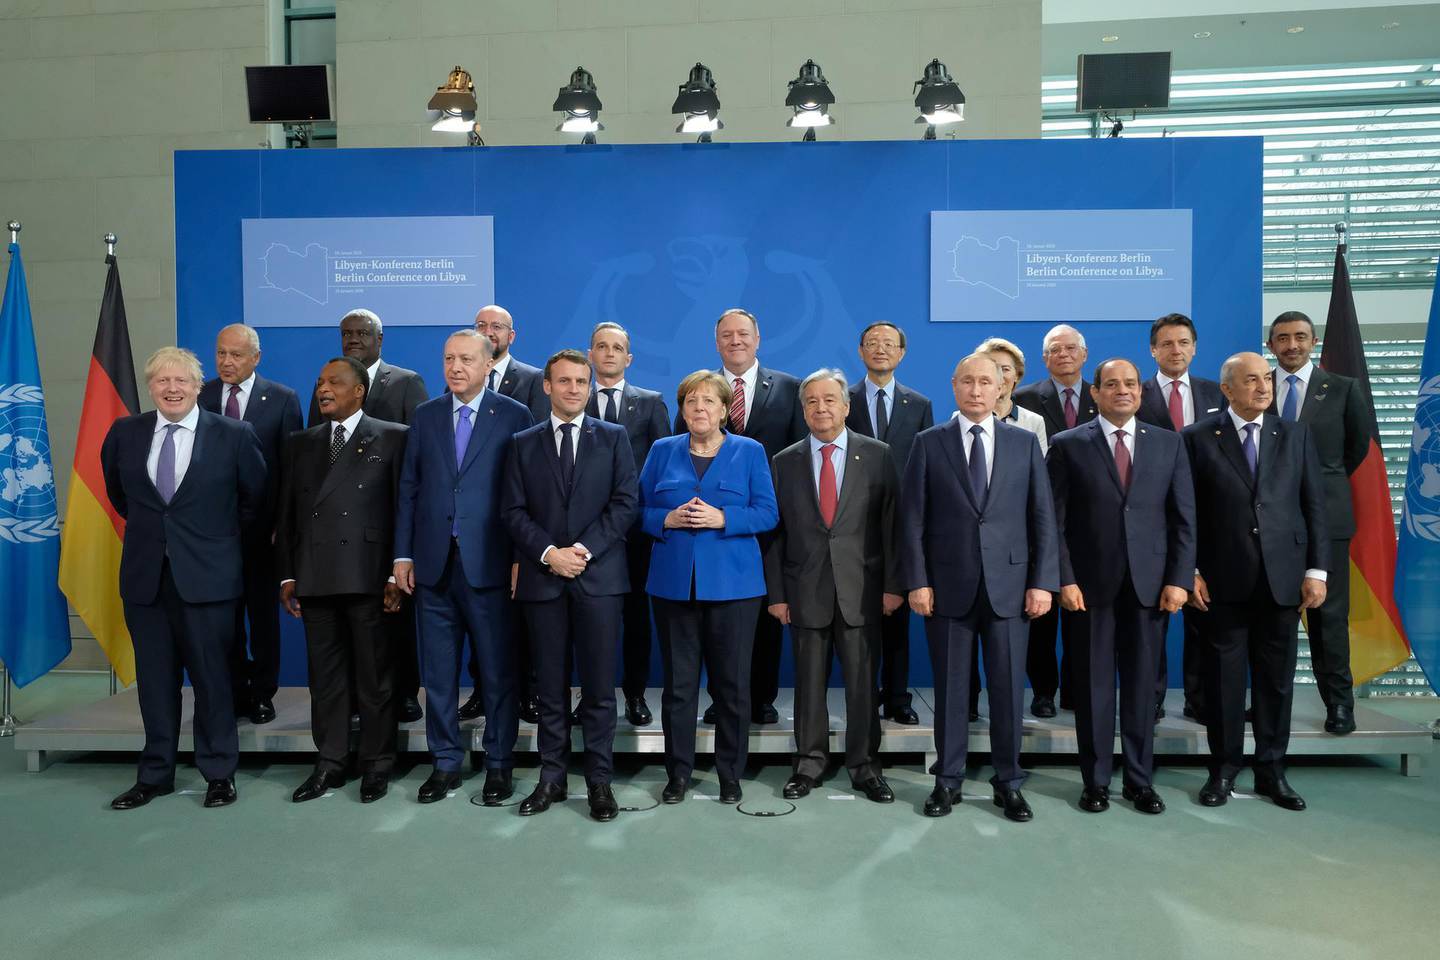 BERLIN, GERMANY - JANUARY 19: Participants, including (from L to R, first row) British Prime Minister Boris Johnson, Turkish President Recep Tayyip Erdogan (3rd from L), French President Emmanuel Macron, German Chancellor Angela Merkel, United Nations Secretary-General Antonio Guterres, Russian President Vladimir Putin and Egyptian President Abdel Fattah el-Sisi, as well as U.S. Secretary of State Mike Pompeo (C, 2nd row), and Italian Prime Minister Giuseppe Conte (2nd row, 2nd from R) pose for a group photo at an international summit on securing peace in Libya at the Chancellery on January 19, 2020 in Berlin, Germany. Leaders of nations and organizations linked to the current conflict are meeting to discuss measures towards reaching a consensus between the warring sides and ending hostilities.   (Photo by Sean Gallup/Getty Images)